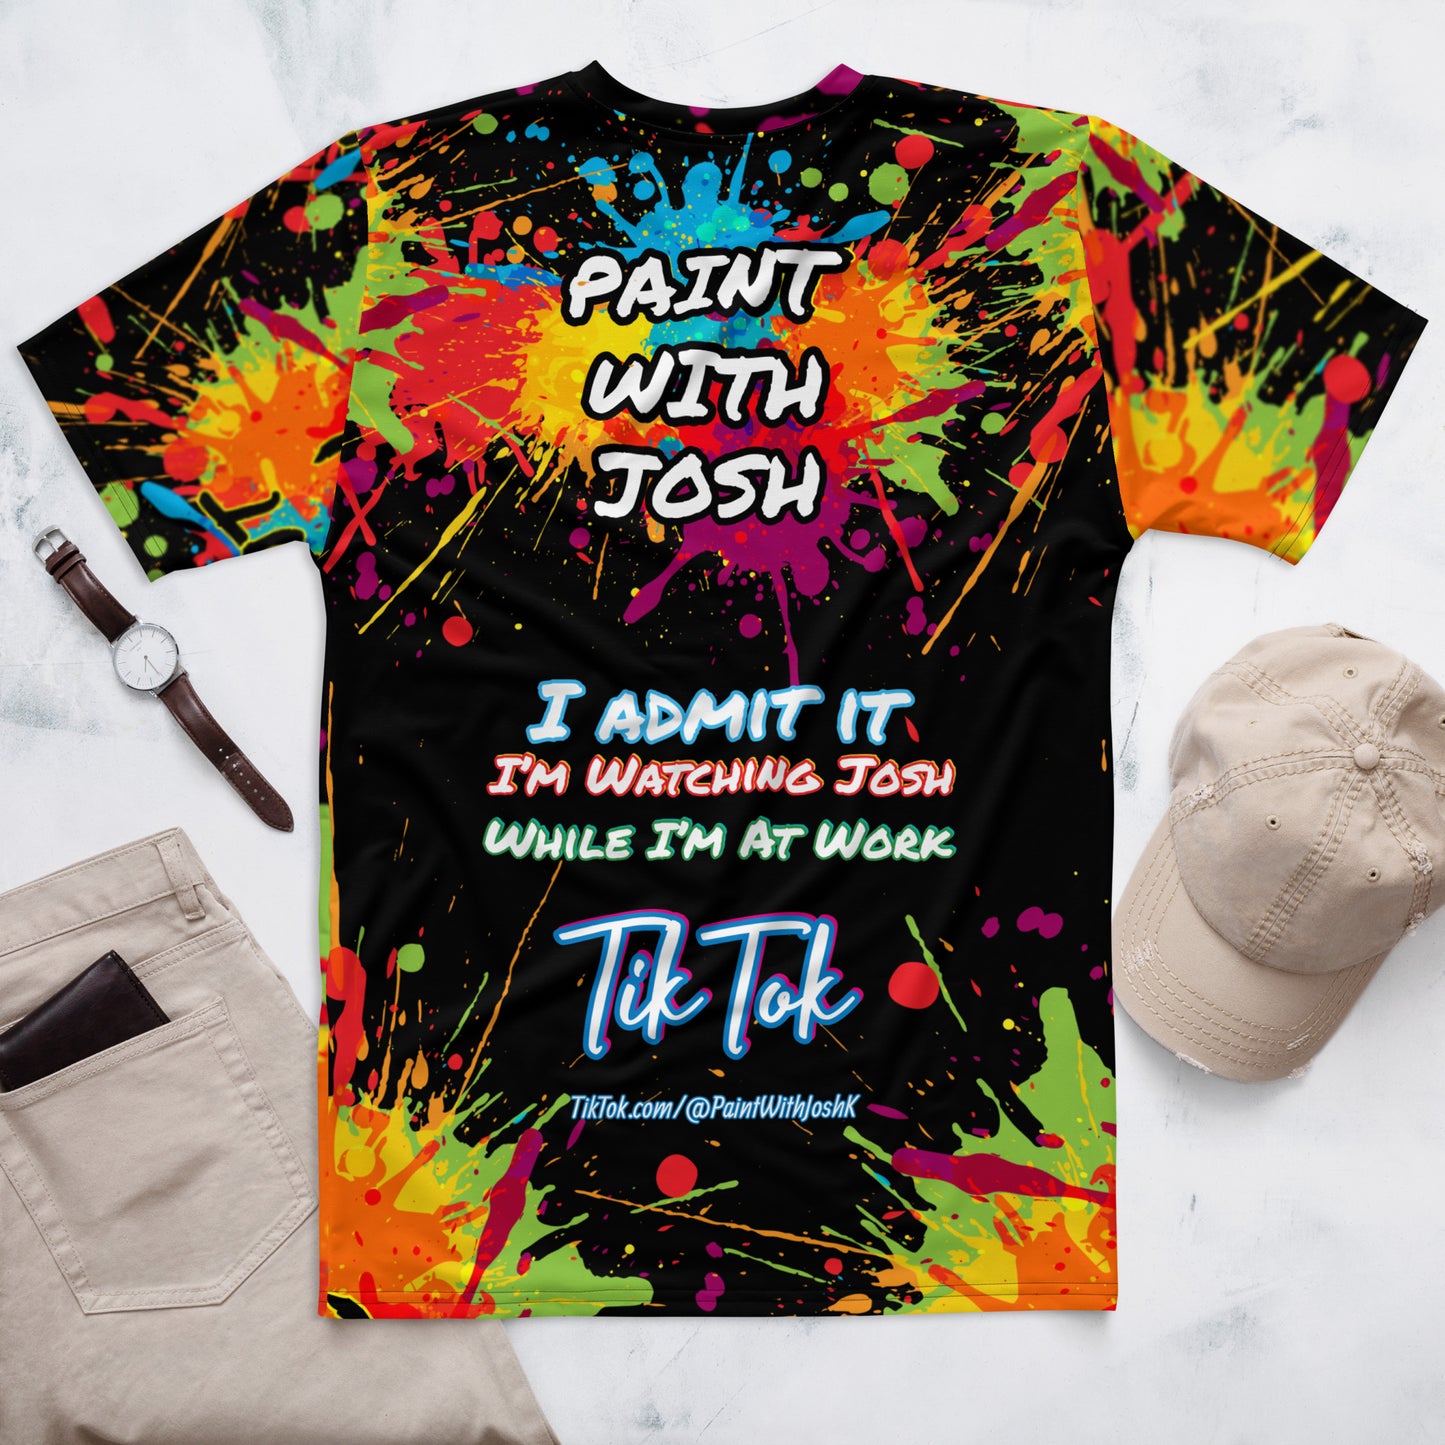 Clothing - I admit it, Im watching Josh while I&#39;m at Work - PaintWithJosh All Over Print Splatter Paint jersey t-shirt